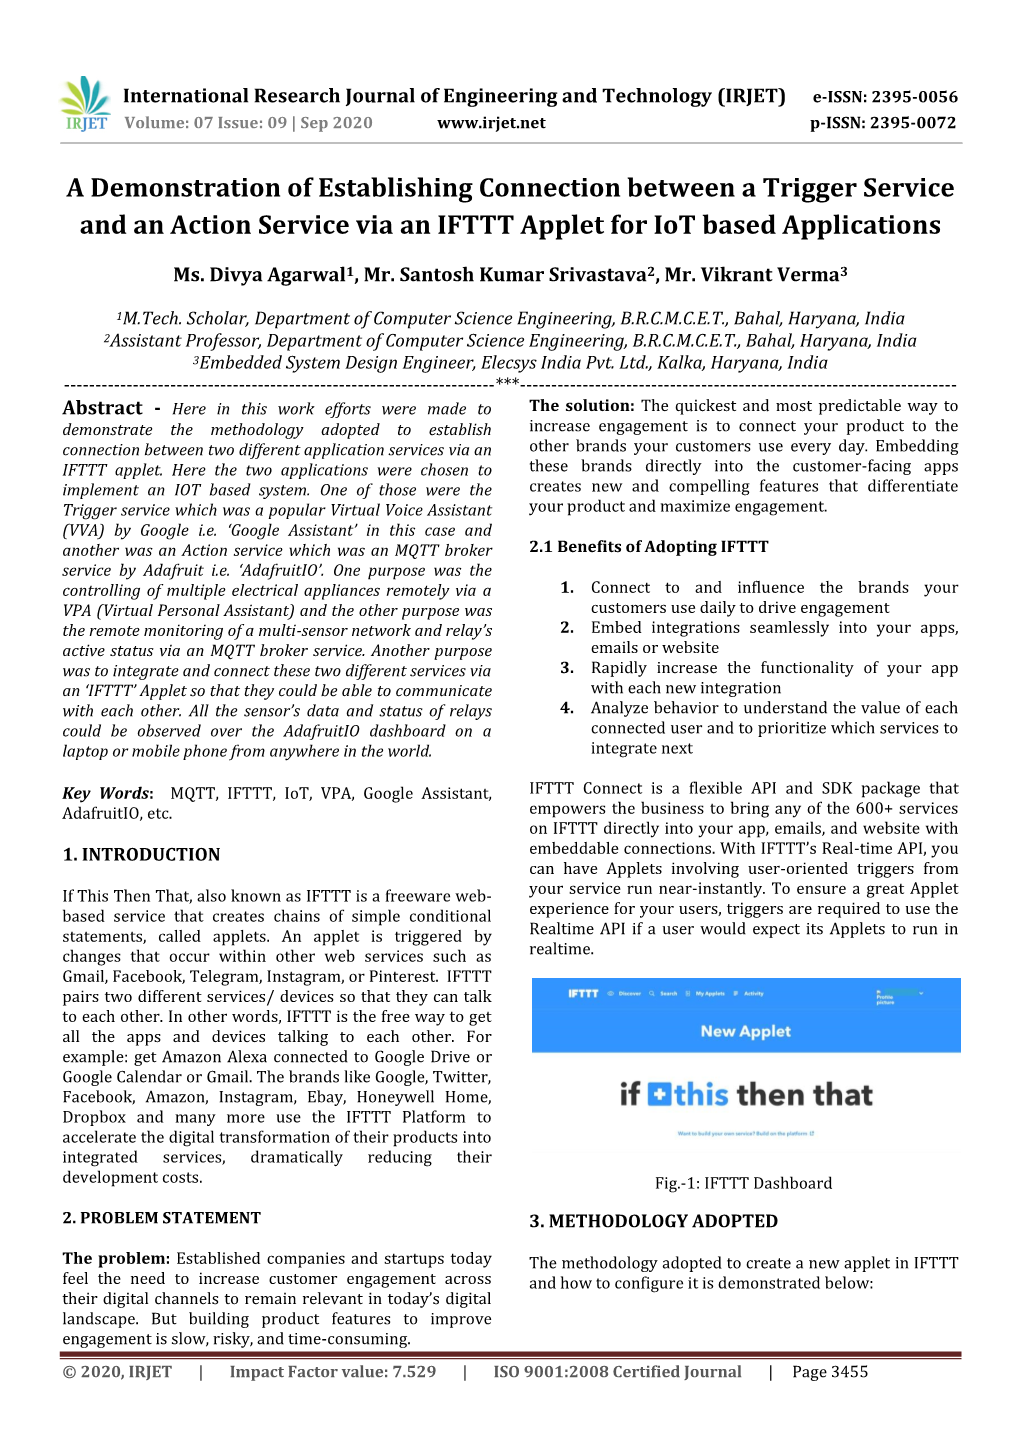 A Demonstration of Establishing Connection Between a Trigger Service and an Action Service Via an IFTTT Applet for Iot Based Applications